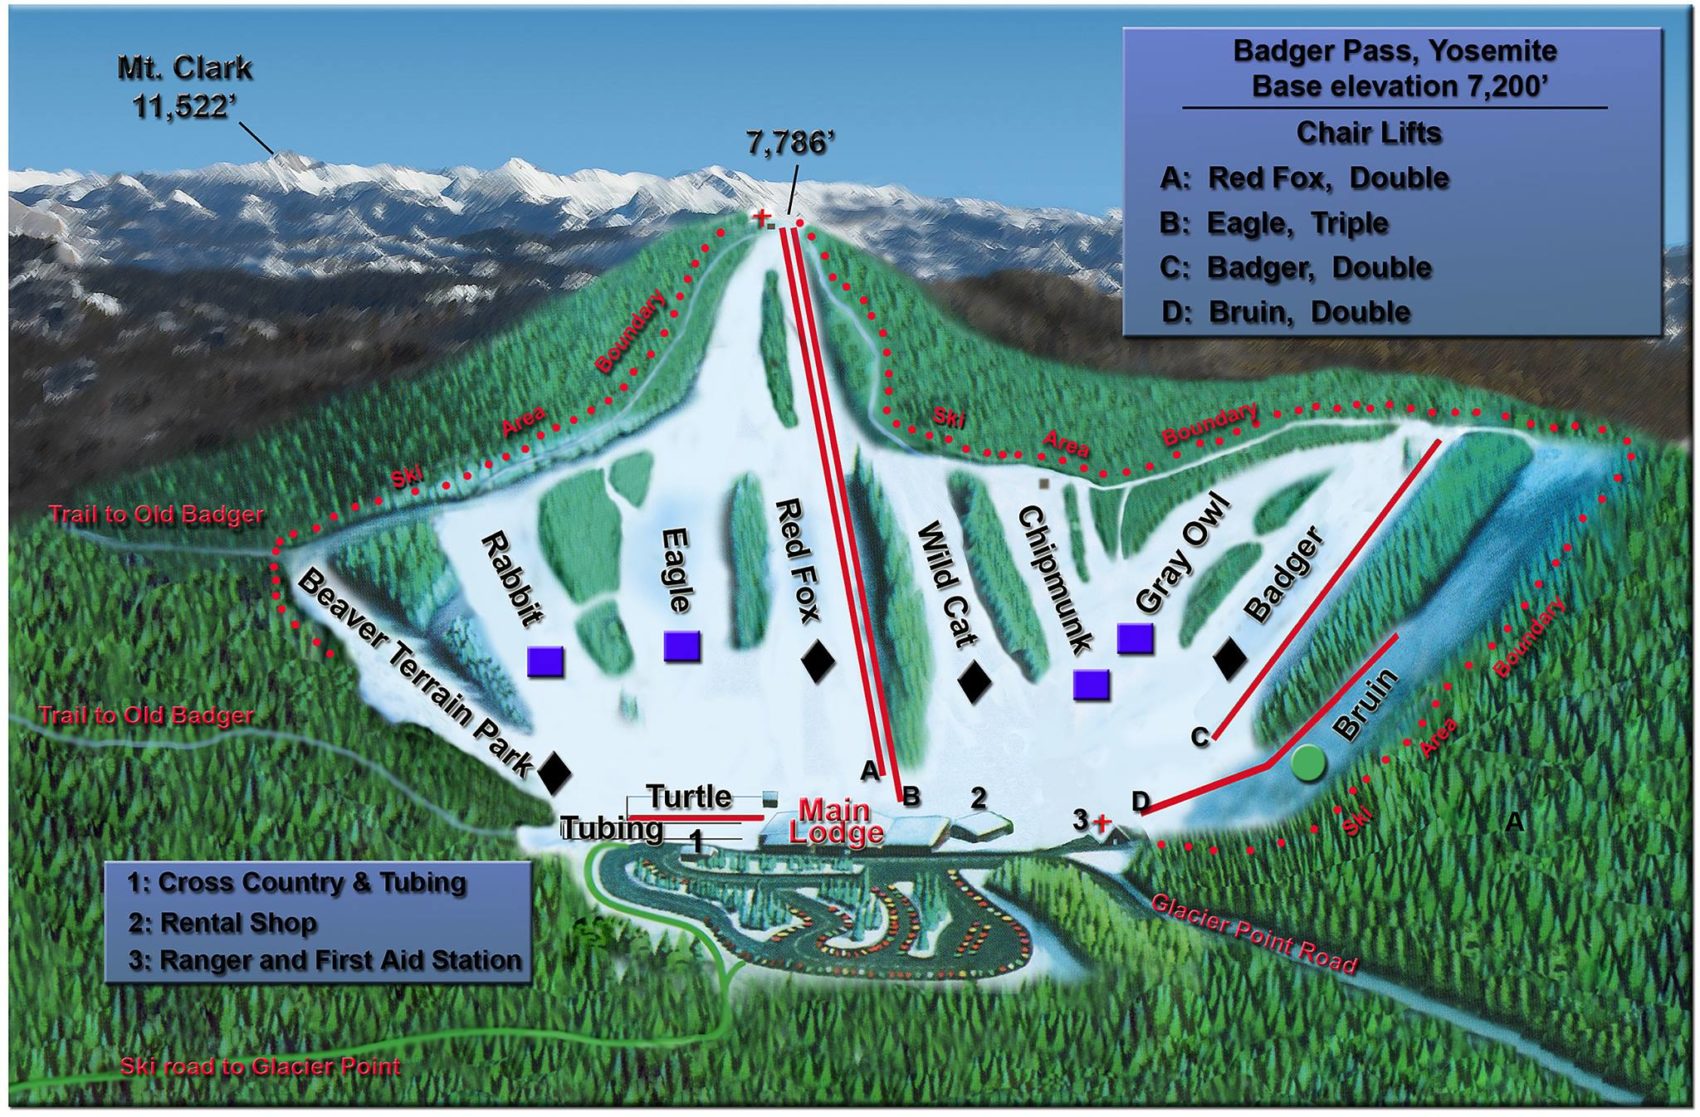 Badger Pass, California's Oldest Ski Area Will Not Open this Winter Due ...